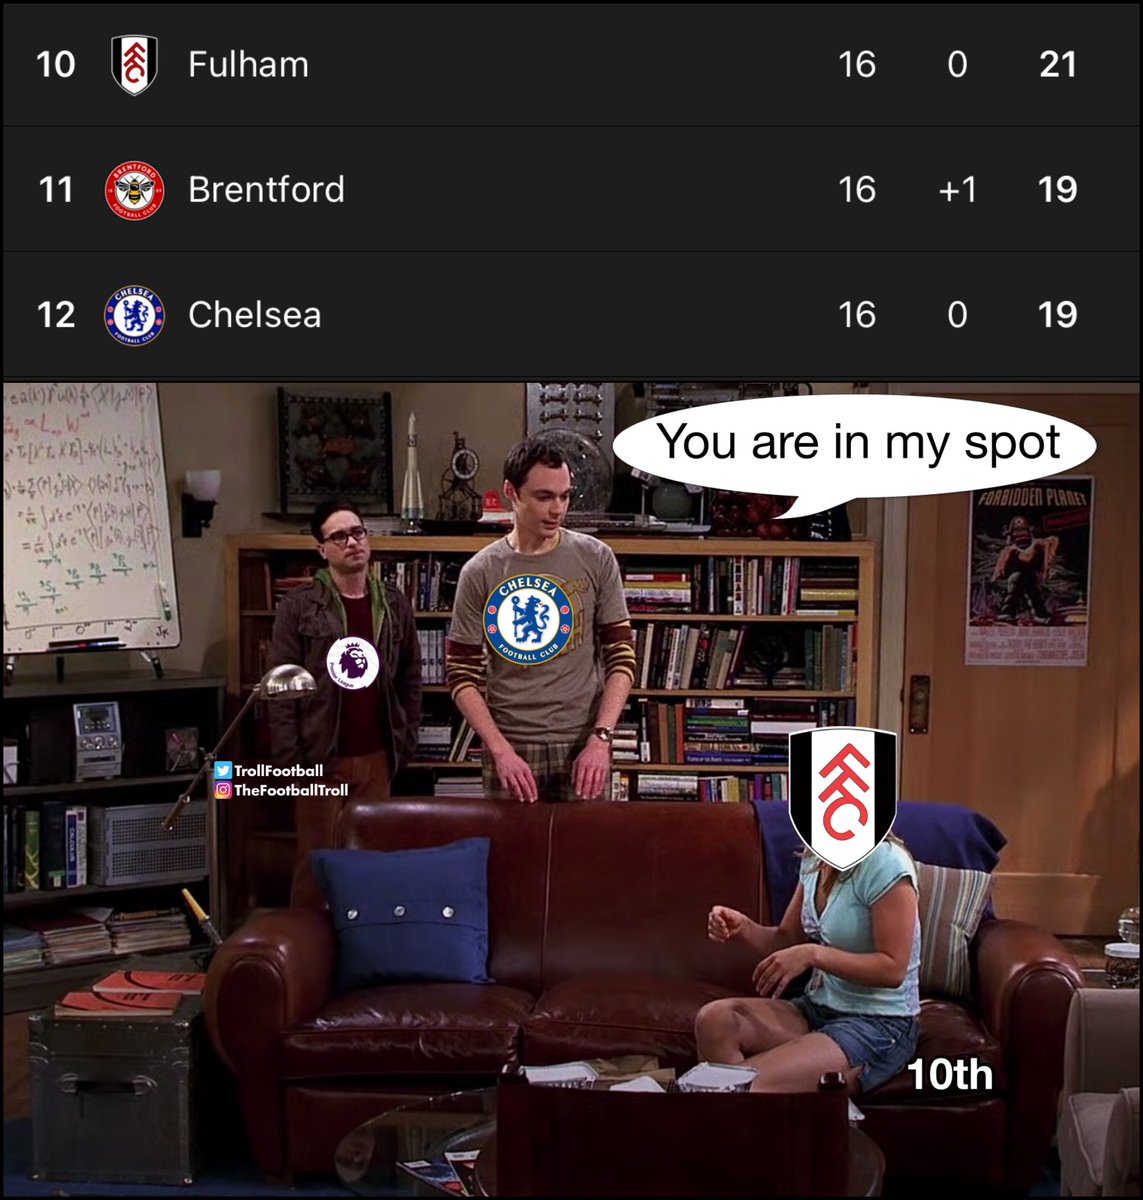 Fulham takes Chelsea's spot in the table